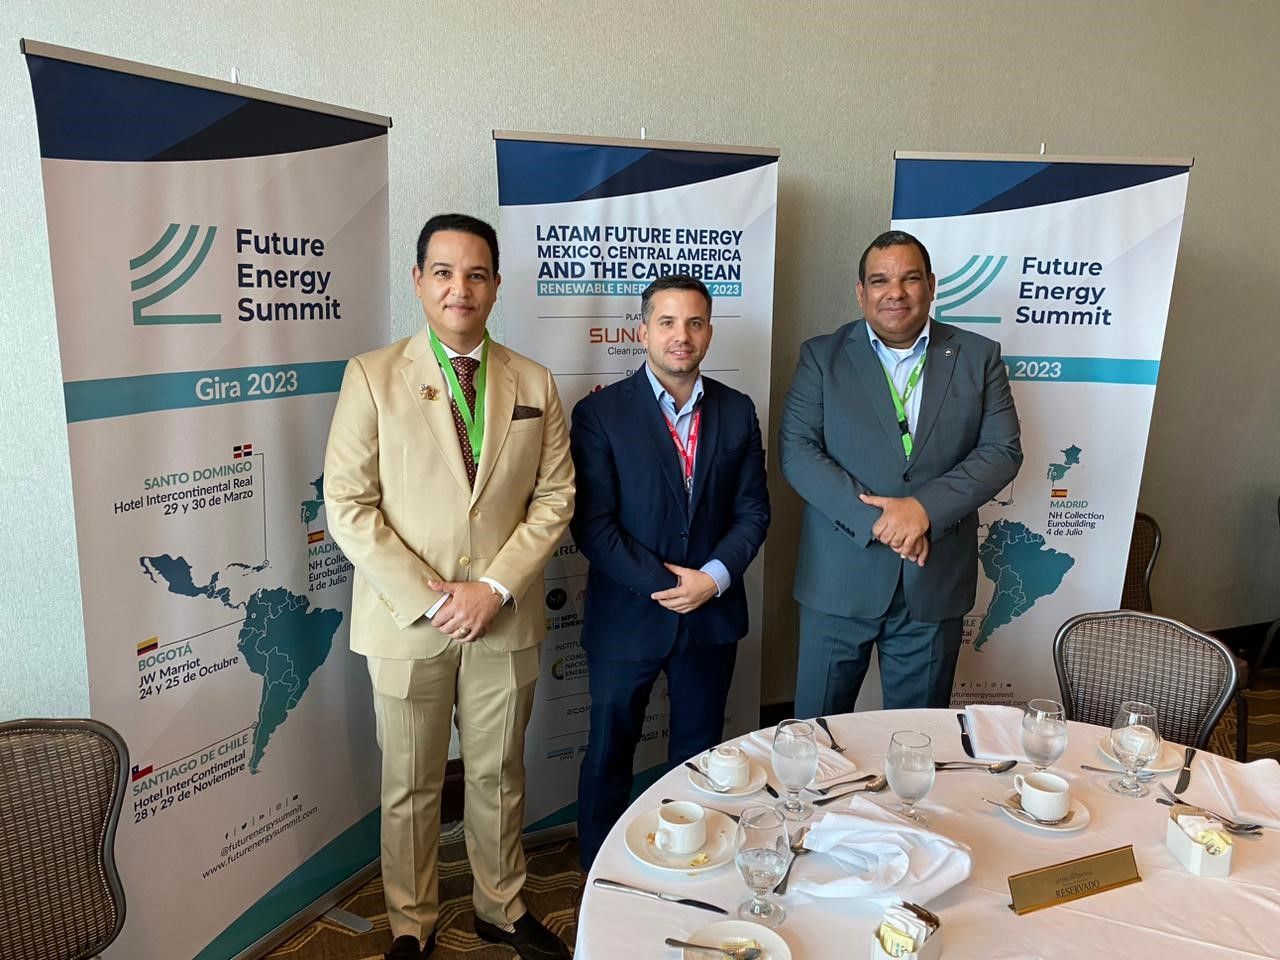 Alfonso Rodríguez, Vice Minister of Energy Saving and Efficiency and Nuclear Energy - Ministry of Mines and Energy of Dominican Republic, Antonio Morales, Sr. Sales Manager Mexico, Central America and Caribbean, and Edward Veras, Executive Director - National Energy Commission.